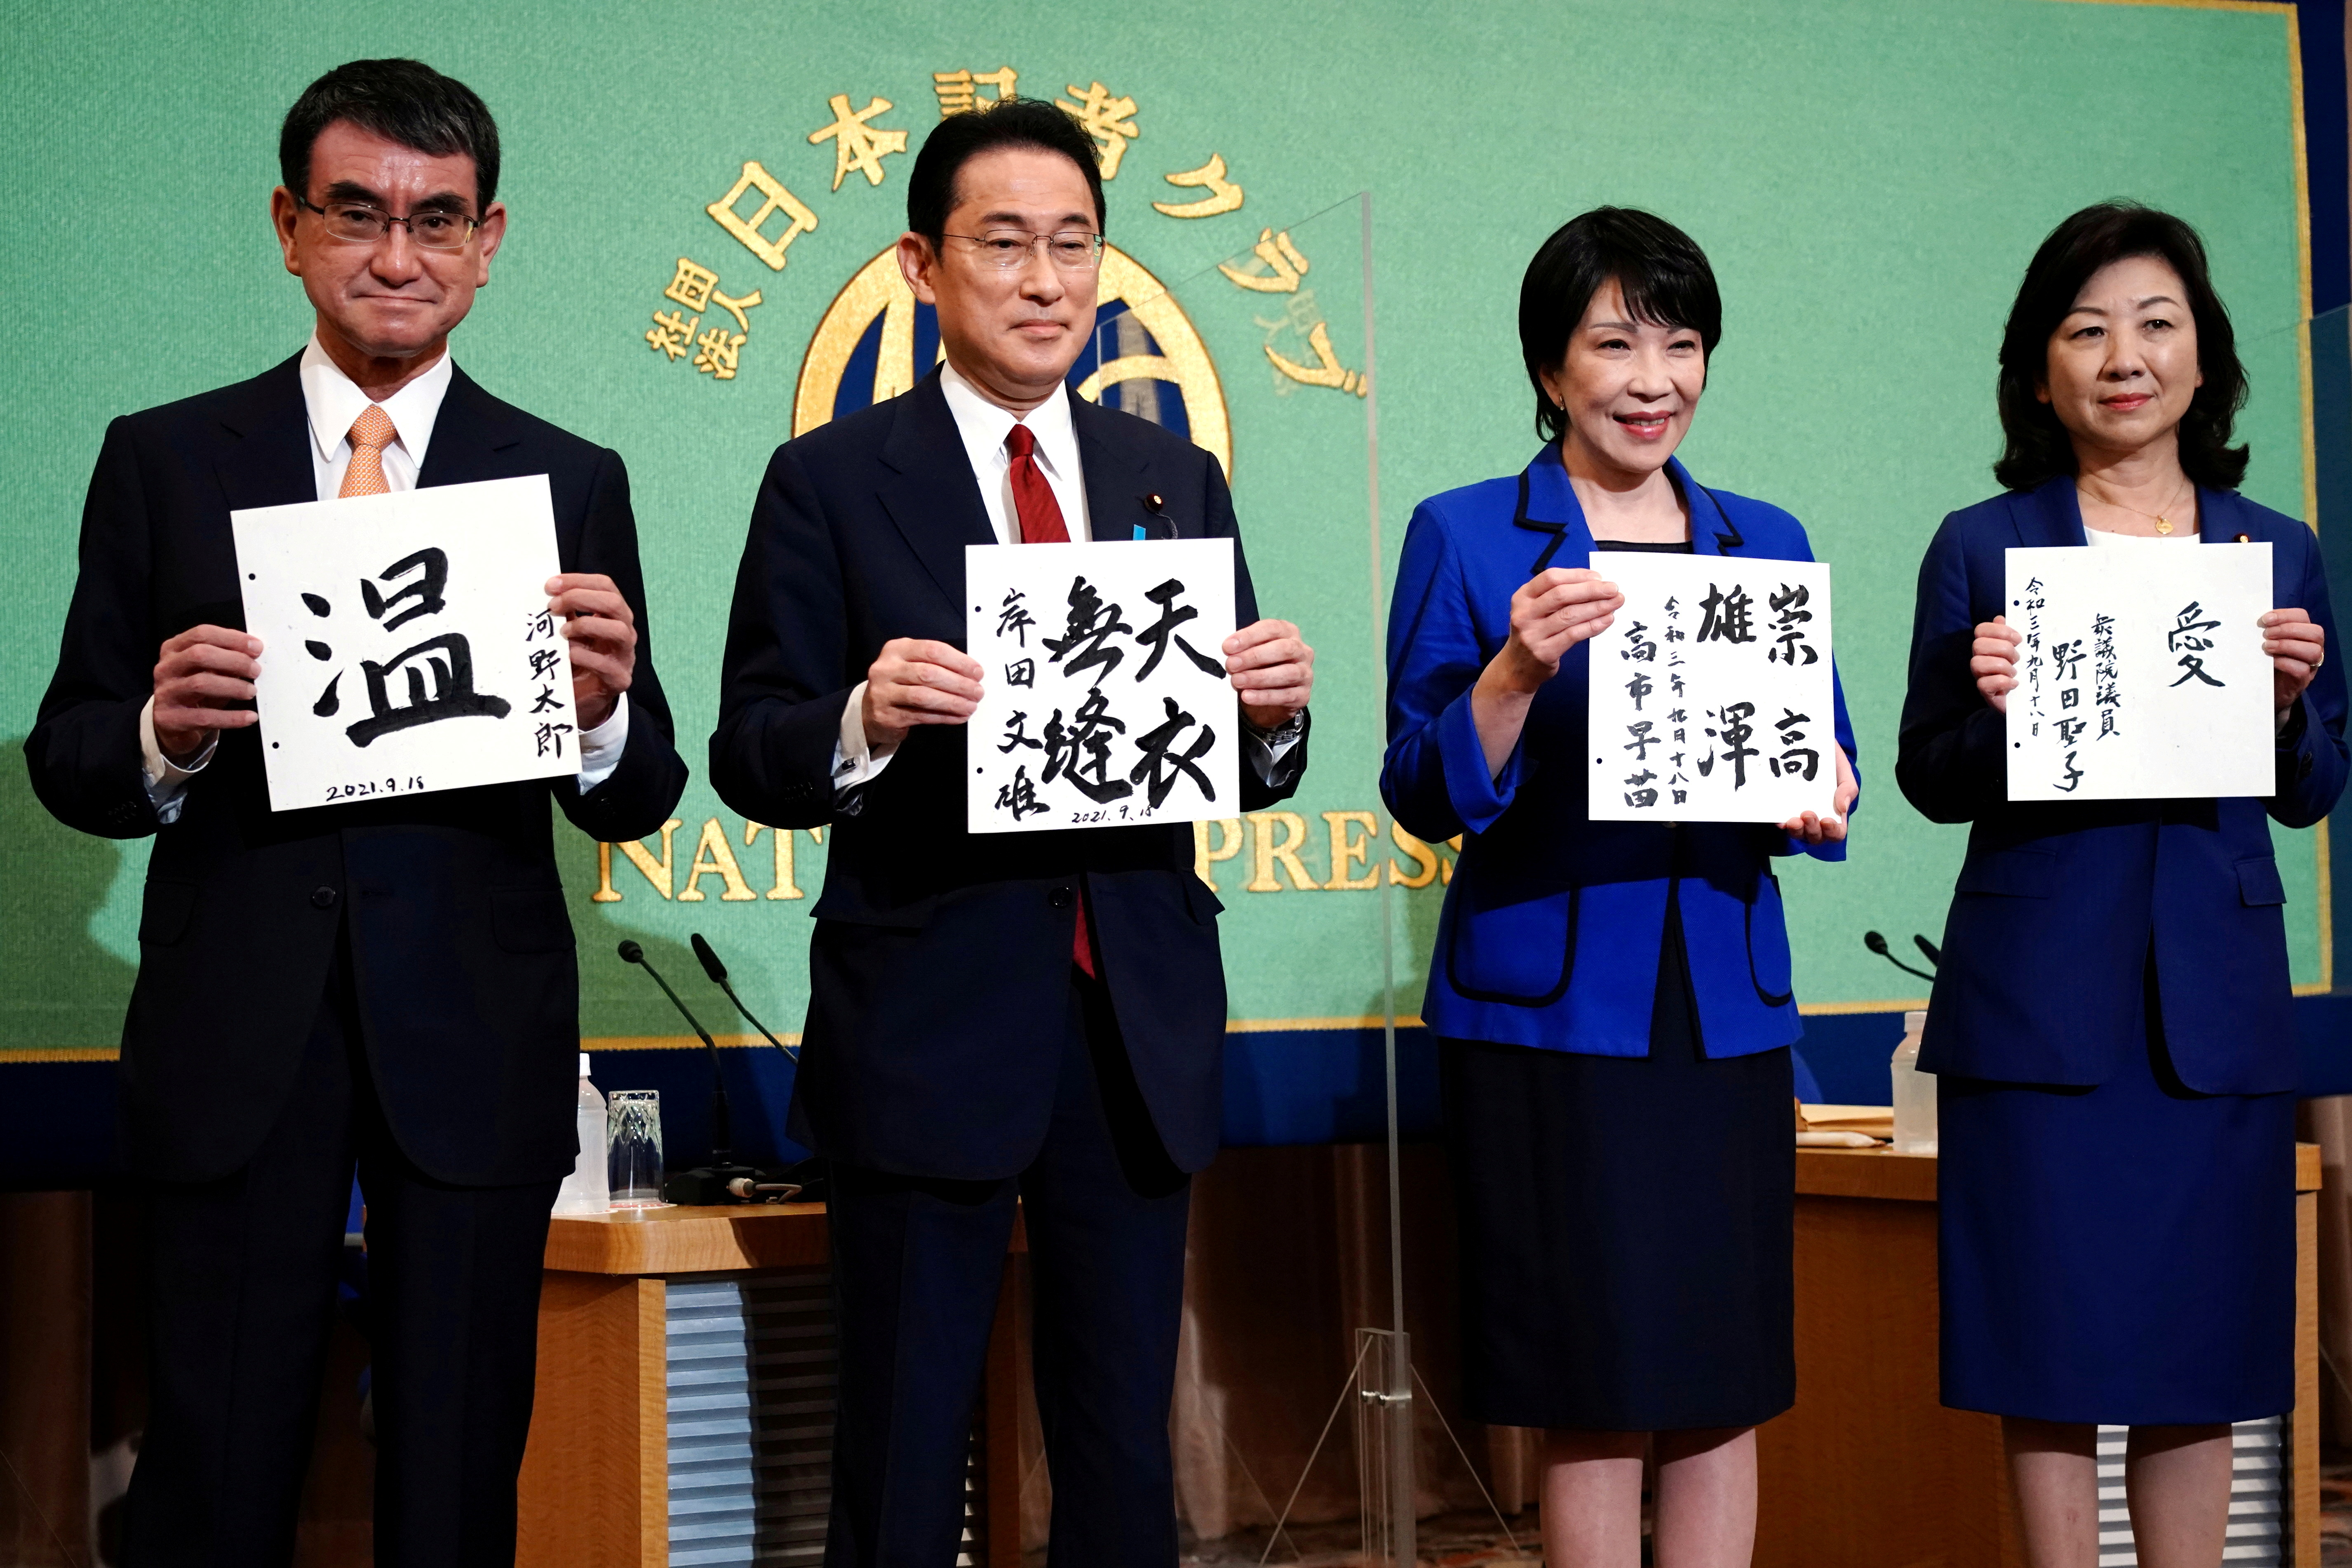 FILE PHOTO: Candidates for the presidential election of the ruling Liberal Democratic Party pose with papers with their sign and words prior to a debate session held by Japan National Press Club